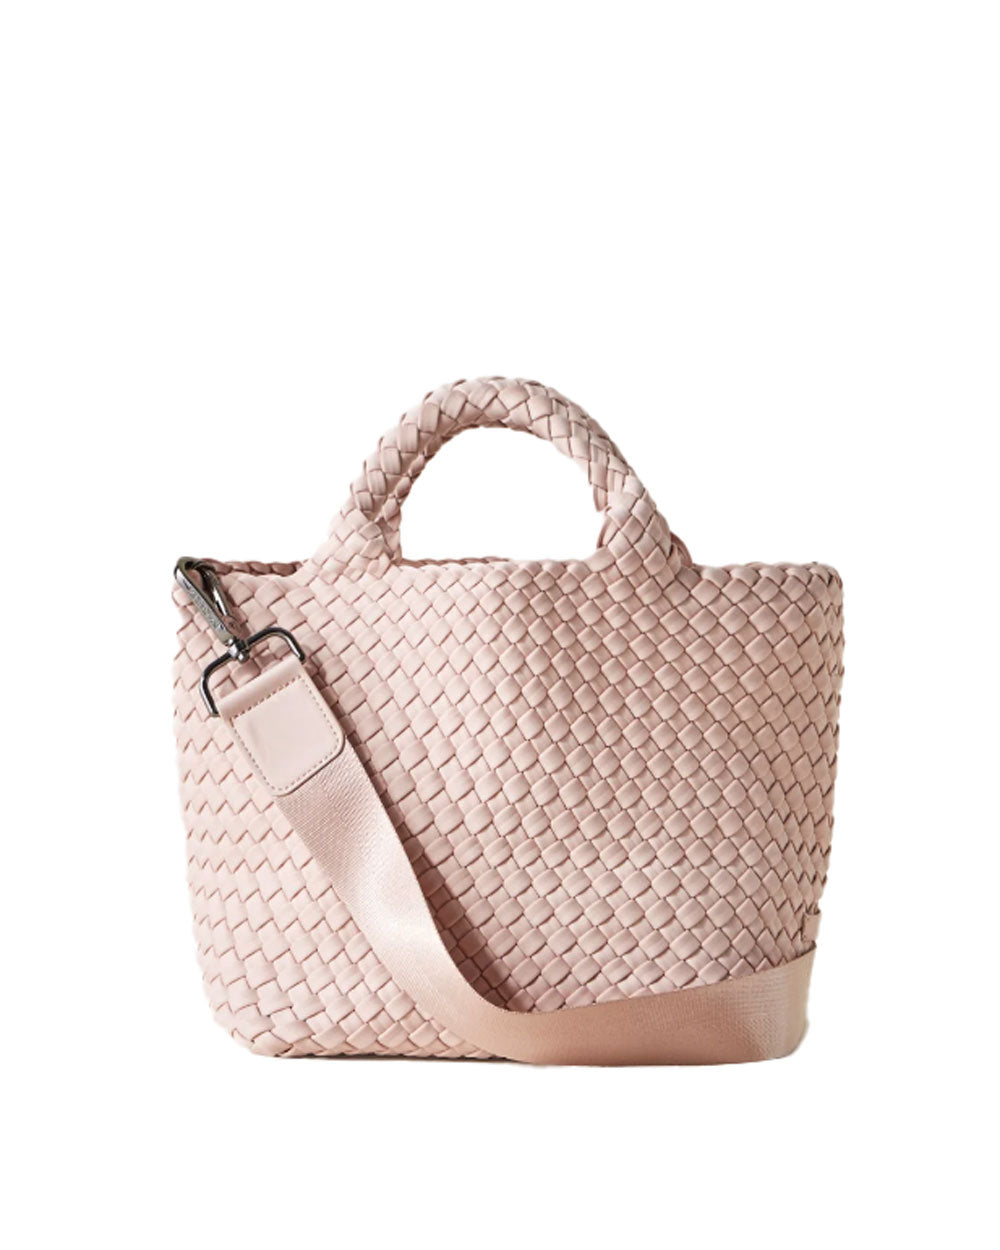 St. Barths Mini Tote in Shell Pink